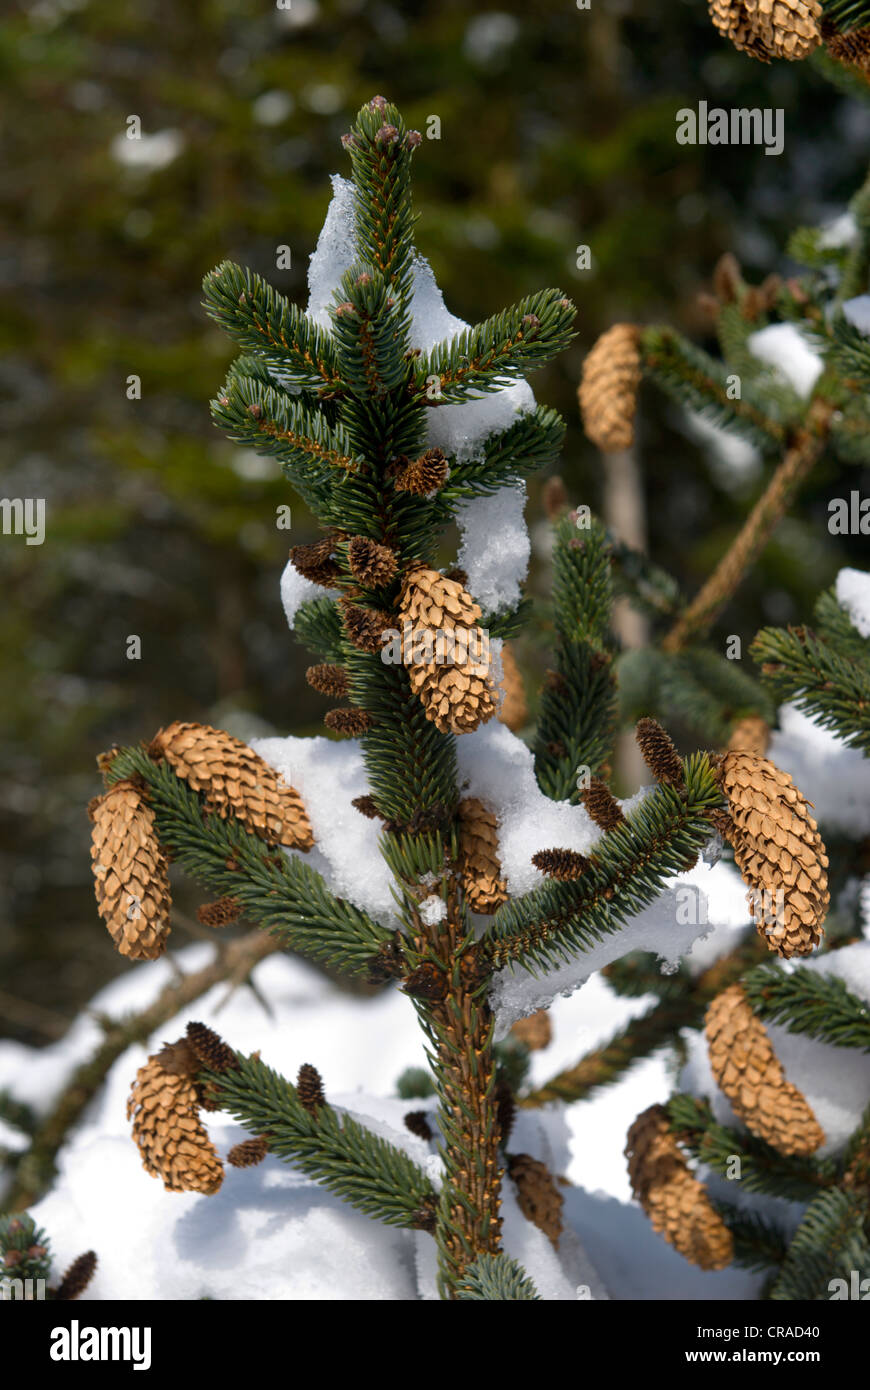 The tip of a small pine tree in winter almost appears decorated for christmas with its old cones and covering of snow Stock Photo